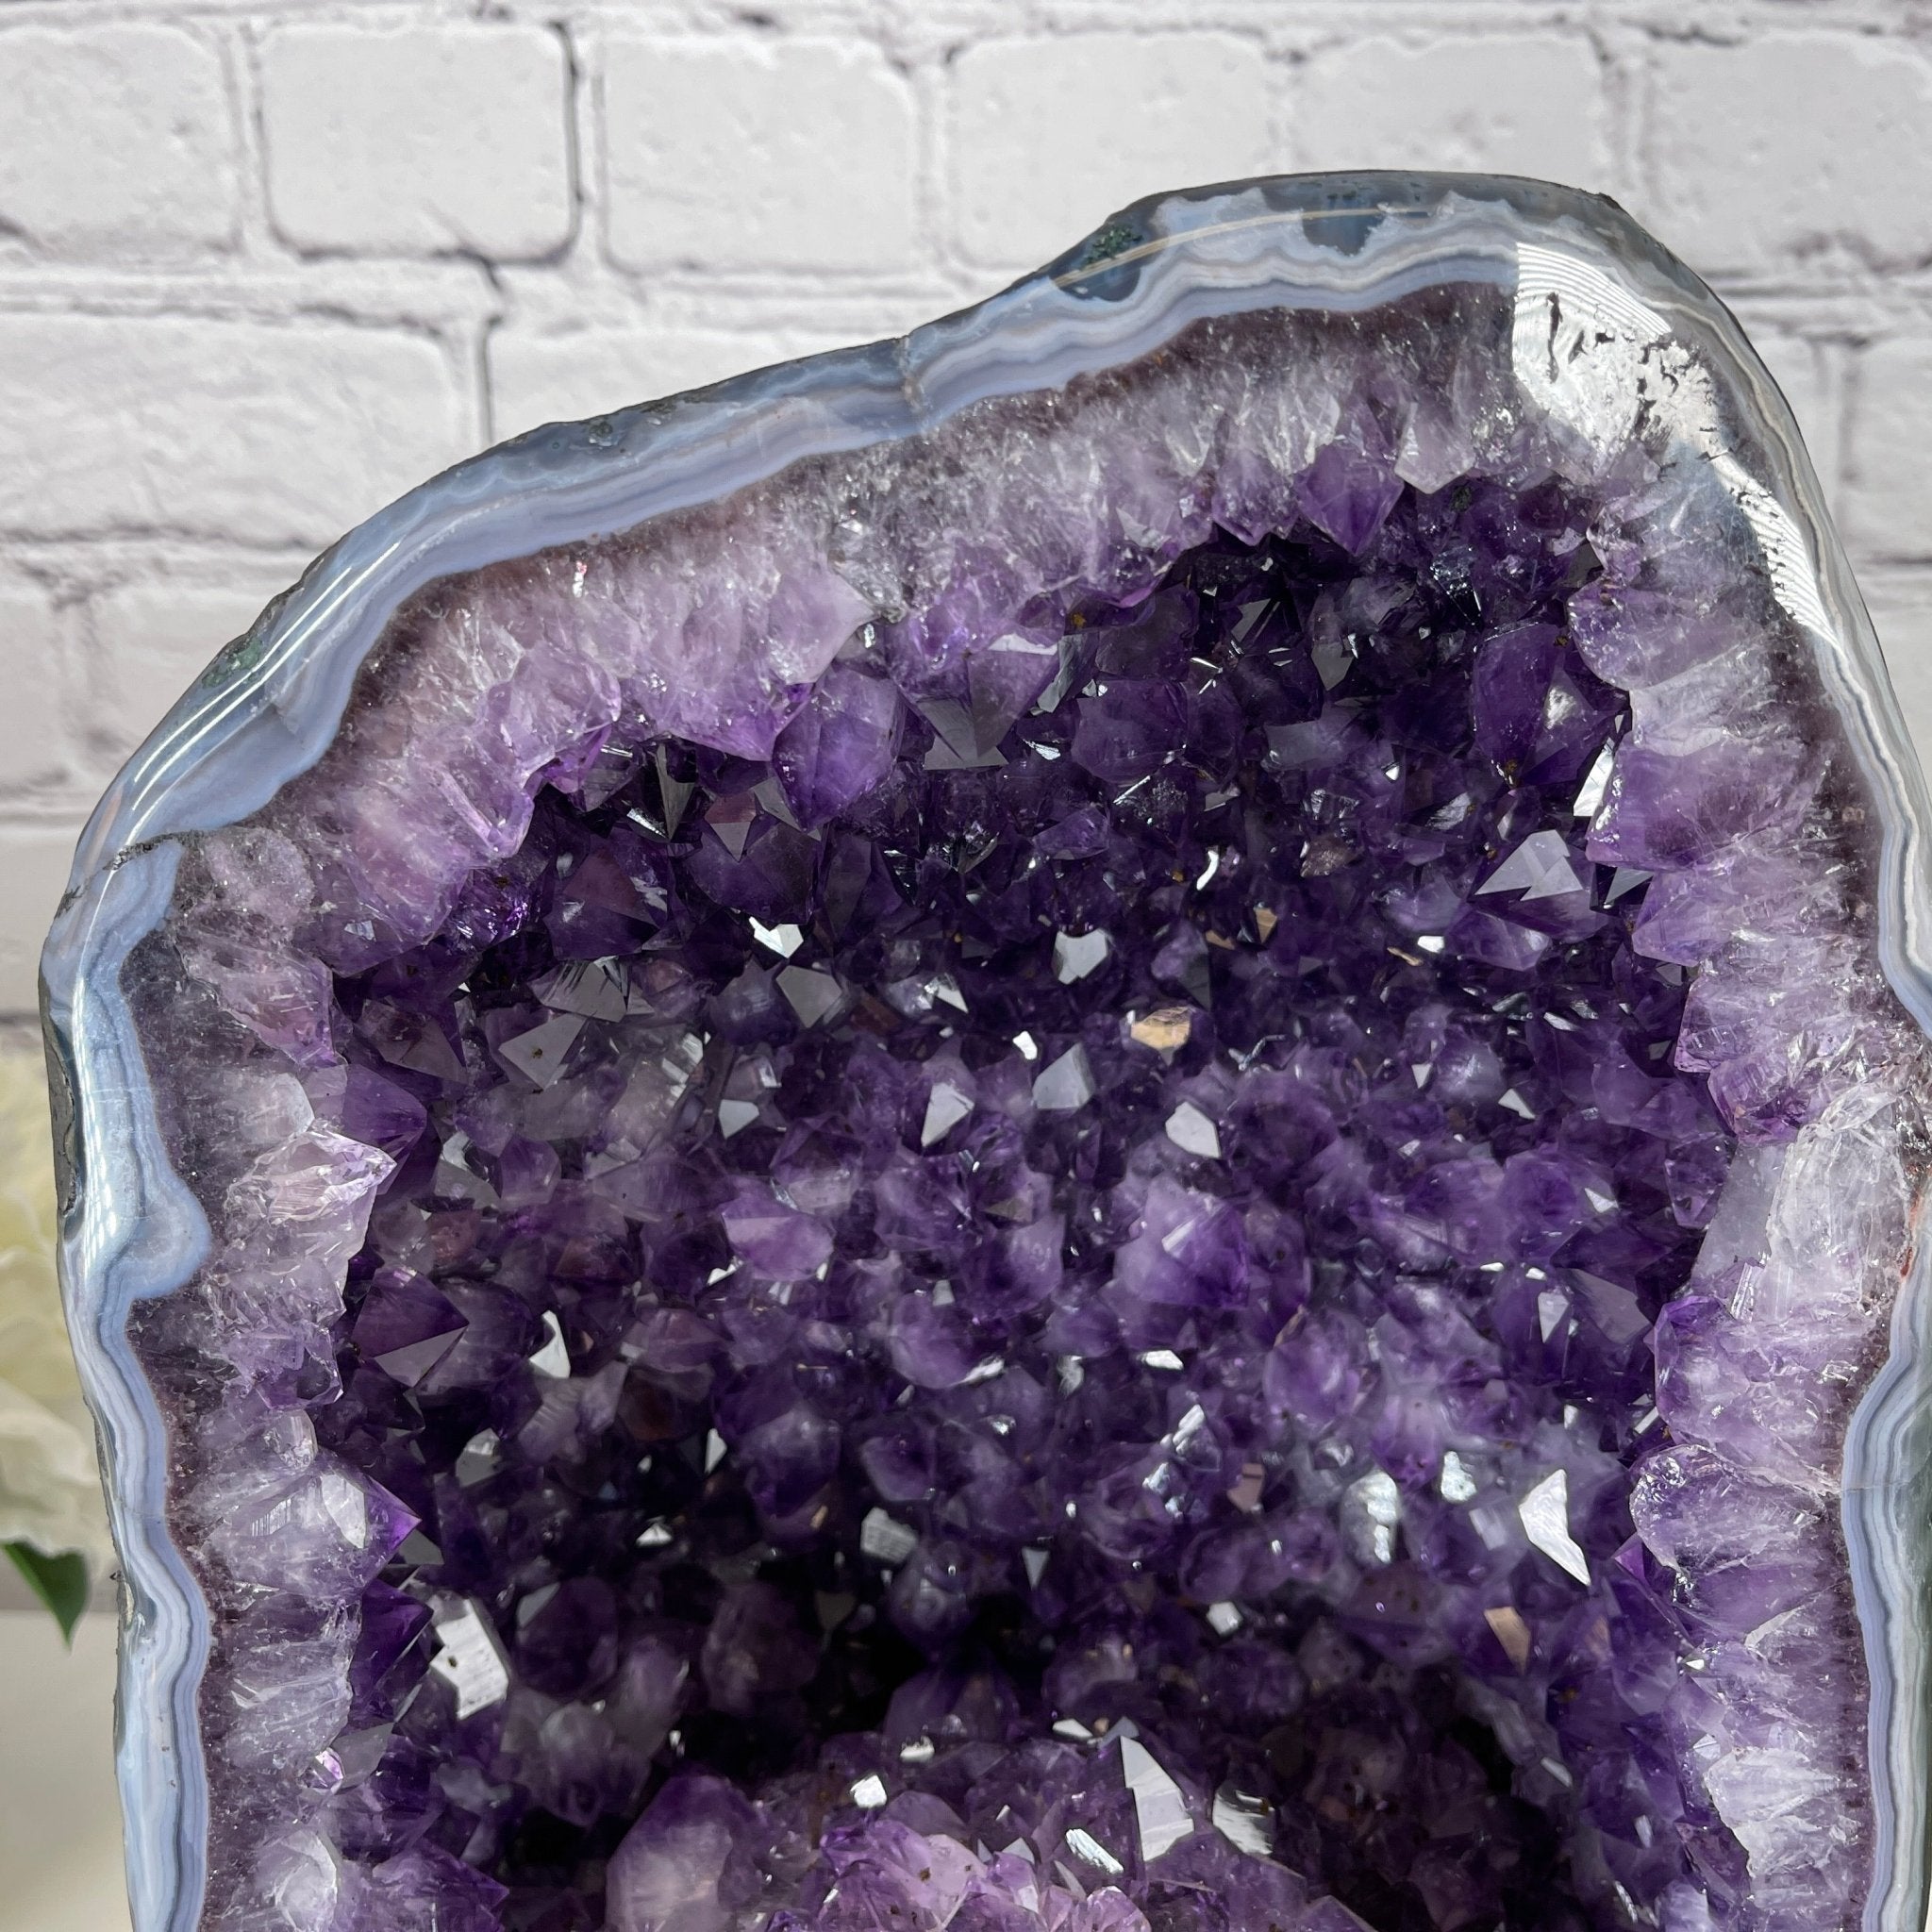 Extra Quality Brazilian Amethyst Cathedral, 11.75” tall & 25.9 lbs #5601-0472 by Brazil Gems - Brazil GemsBrazil GemsExtra Quality Brazilian Amethyst Cathedral, 11.75” tall & 25.9 lbs #5601-0472 by Brazil GemsCathedrals5601-0472